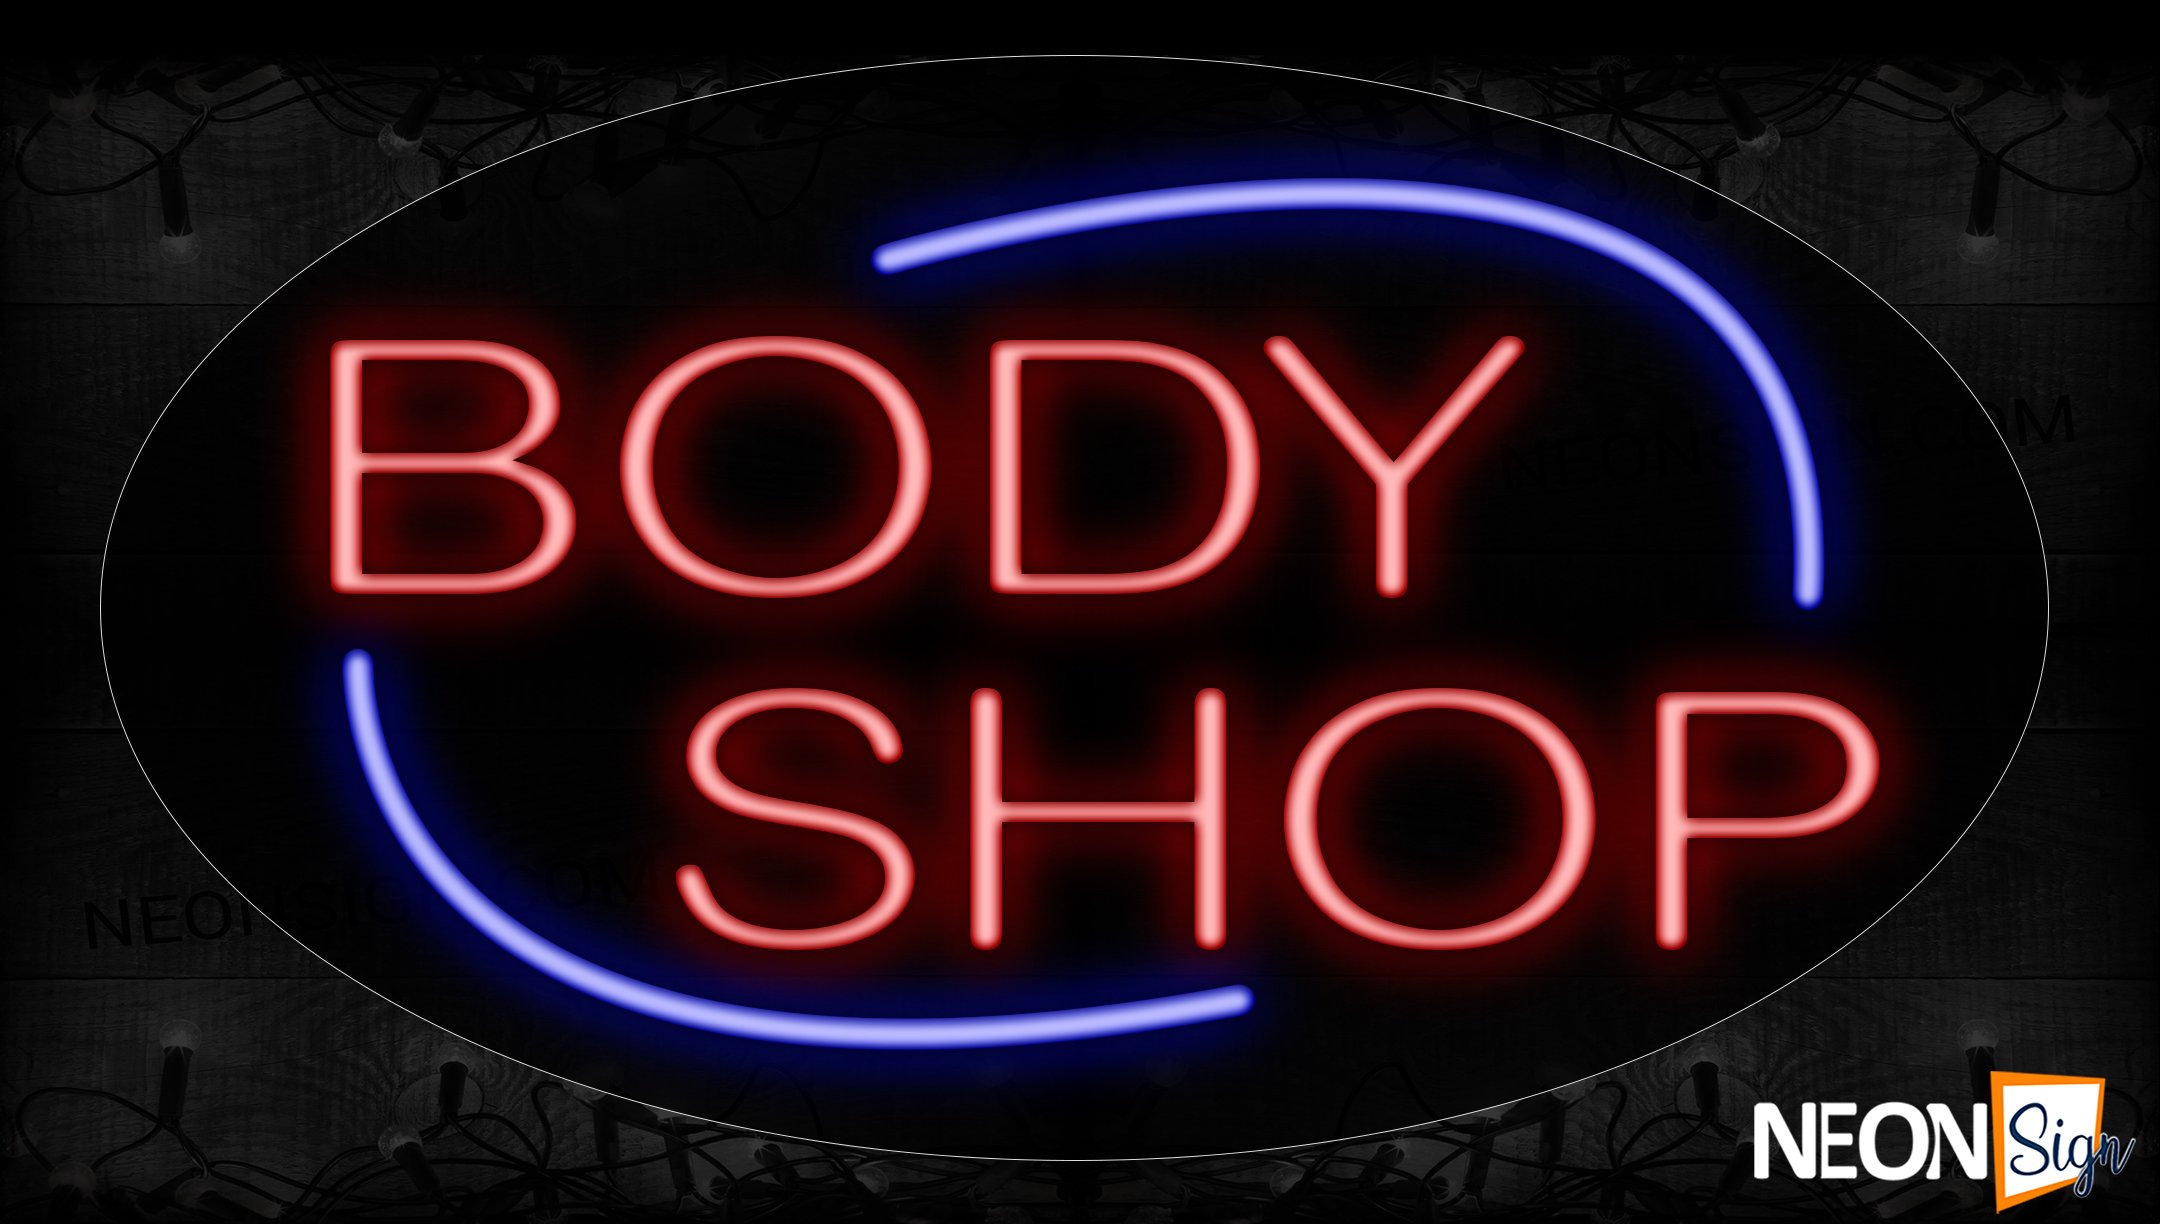 Image of 14156 Body Shop With Blue Arc Border Neon Signs_17x30 Contoured Black Backing